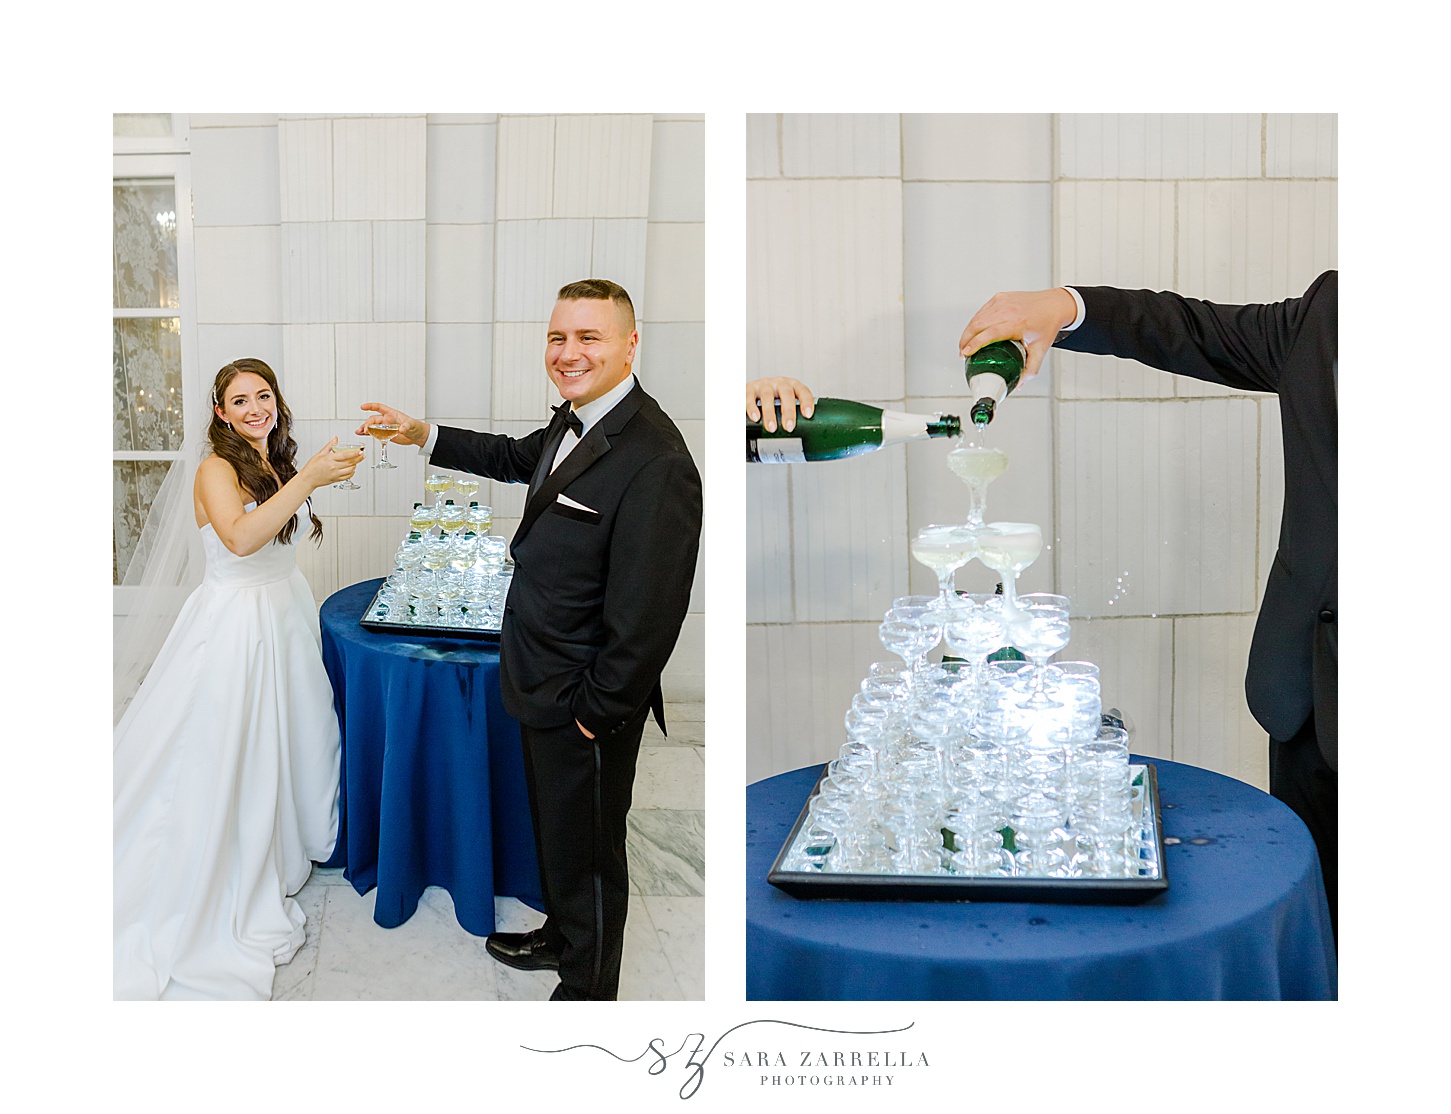 newlyweds pour champagne down tower of glasses 